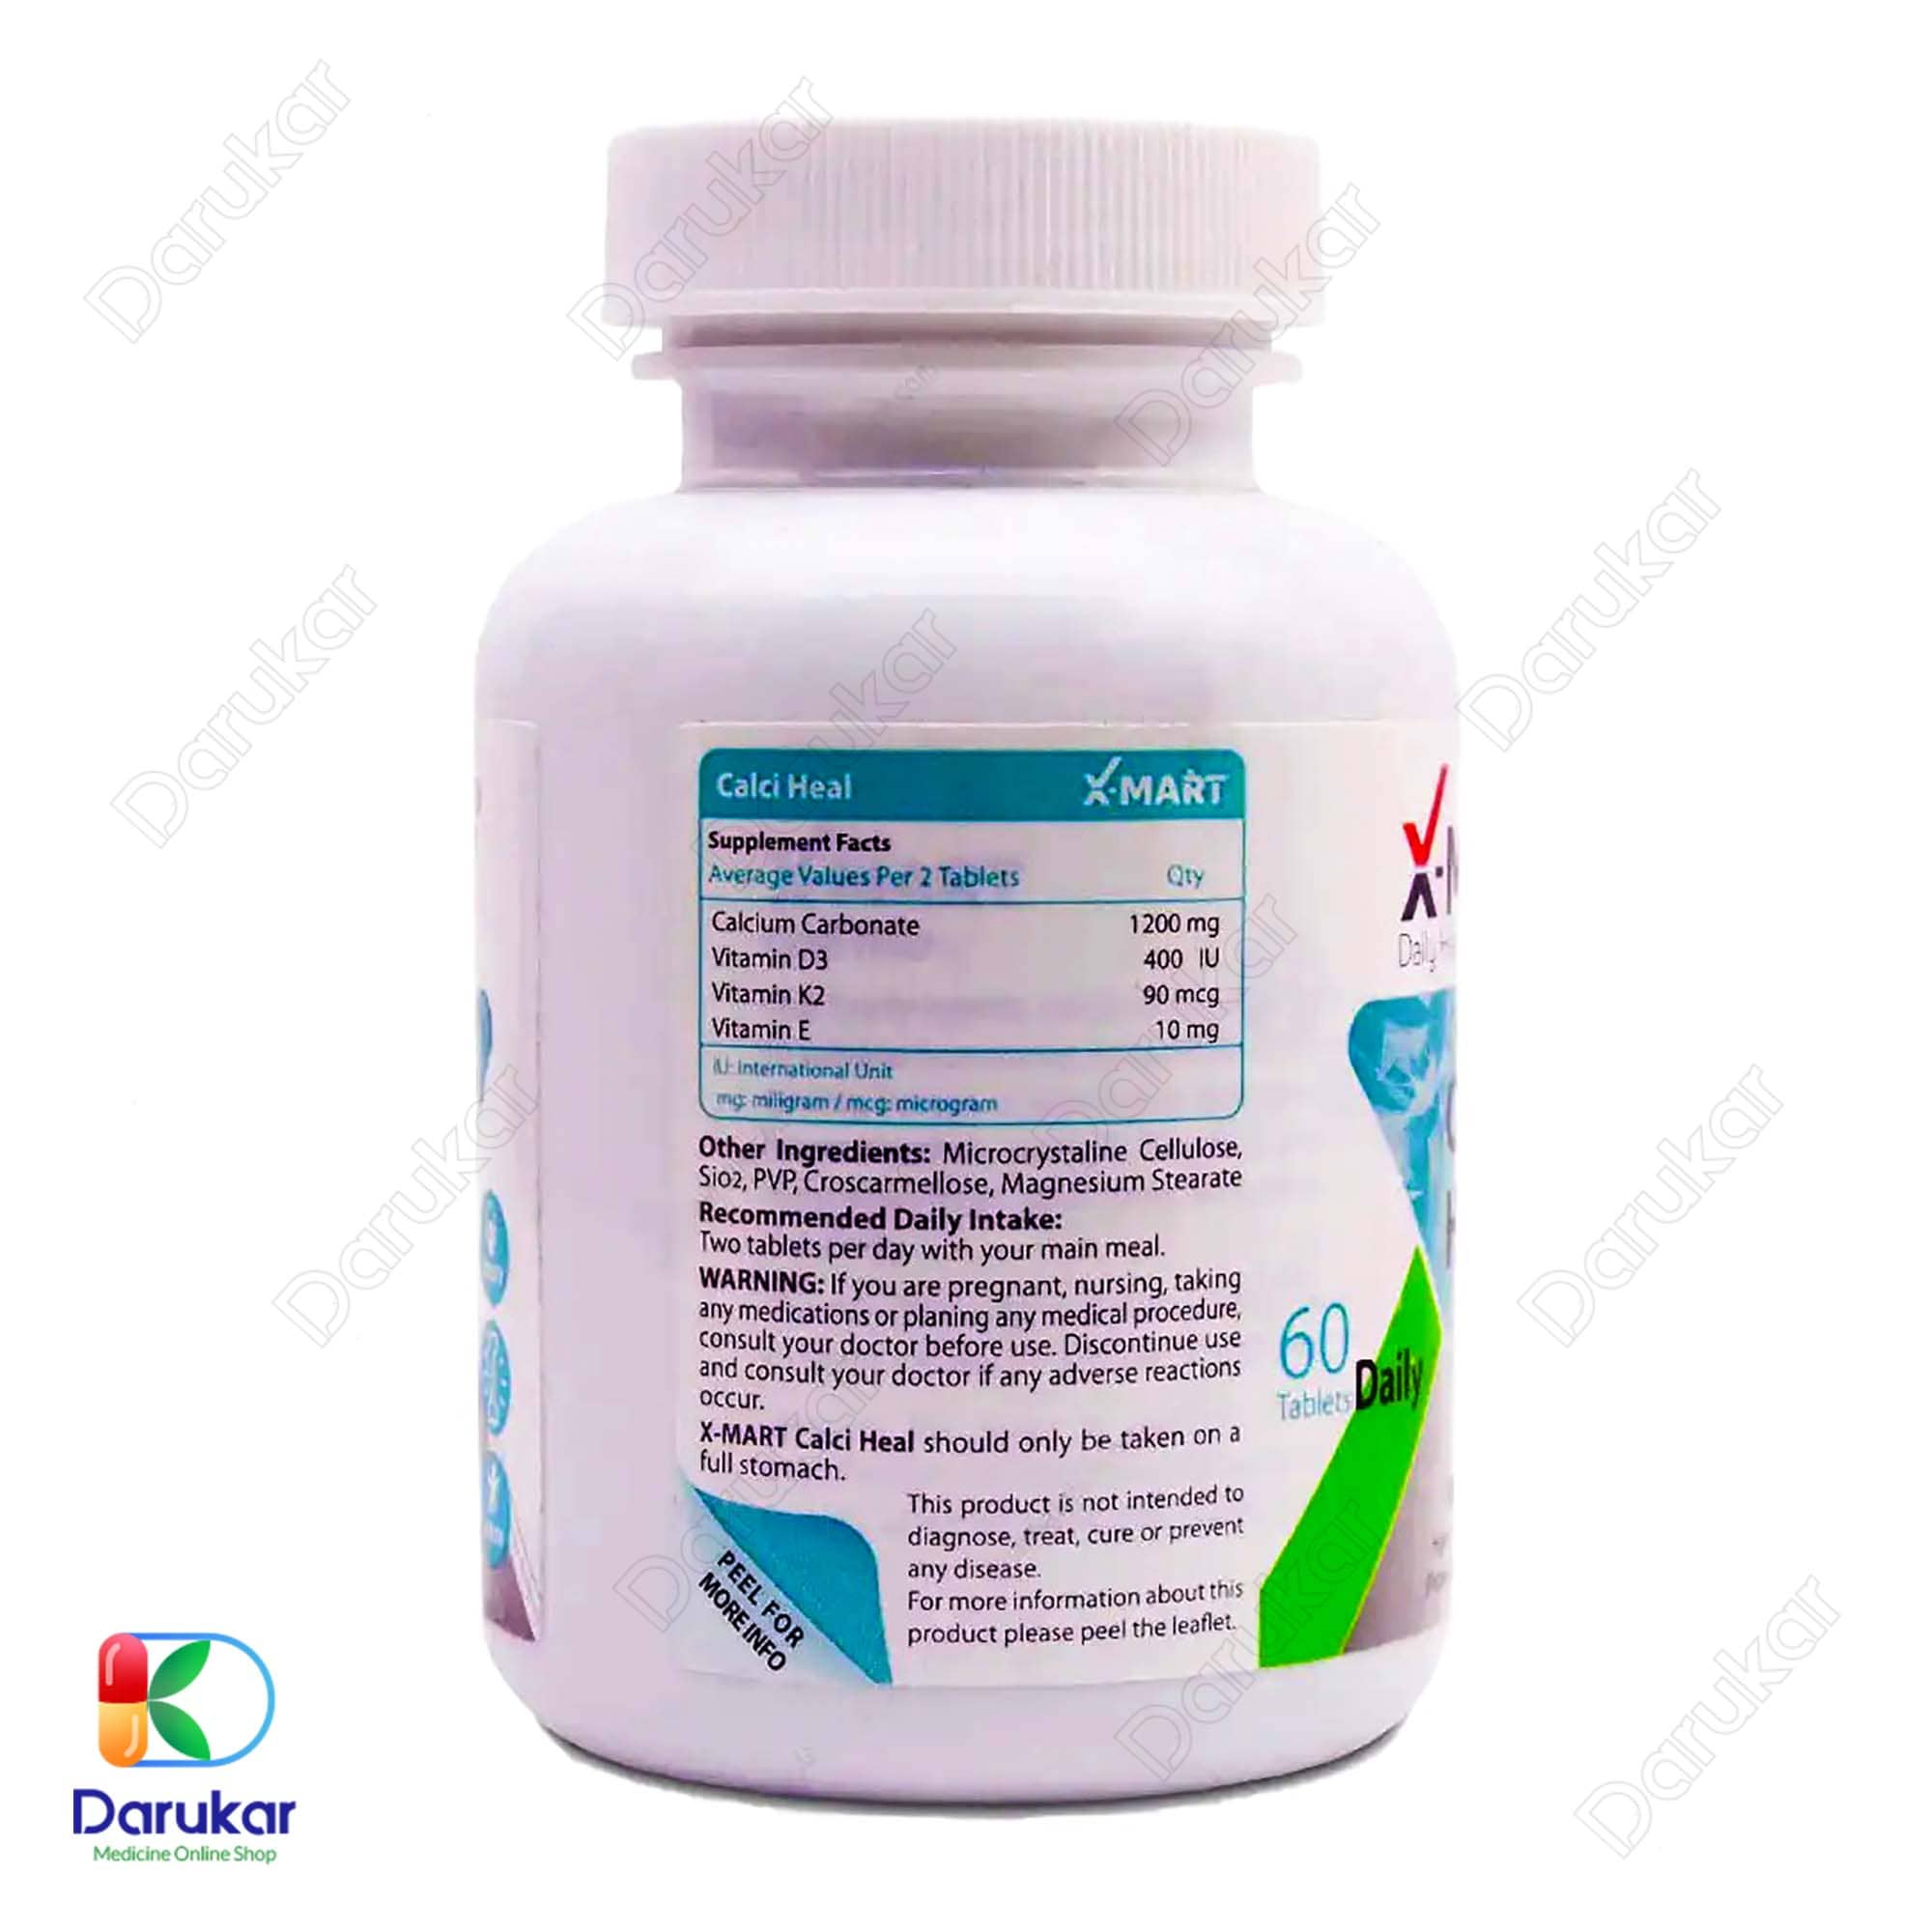 Xmart Calci Heal 60 Tablets Image Gallery 1